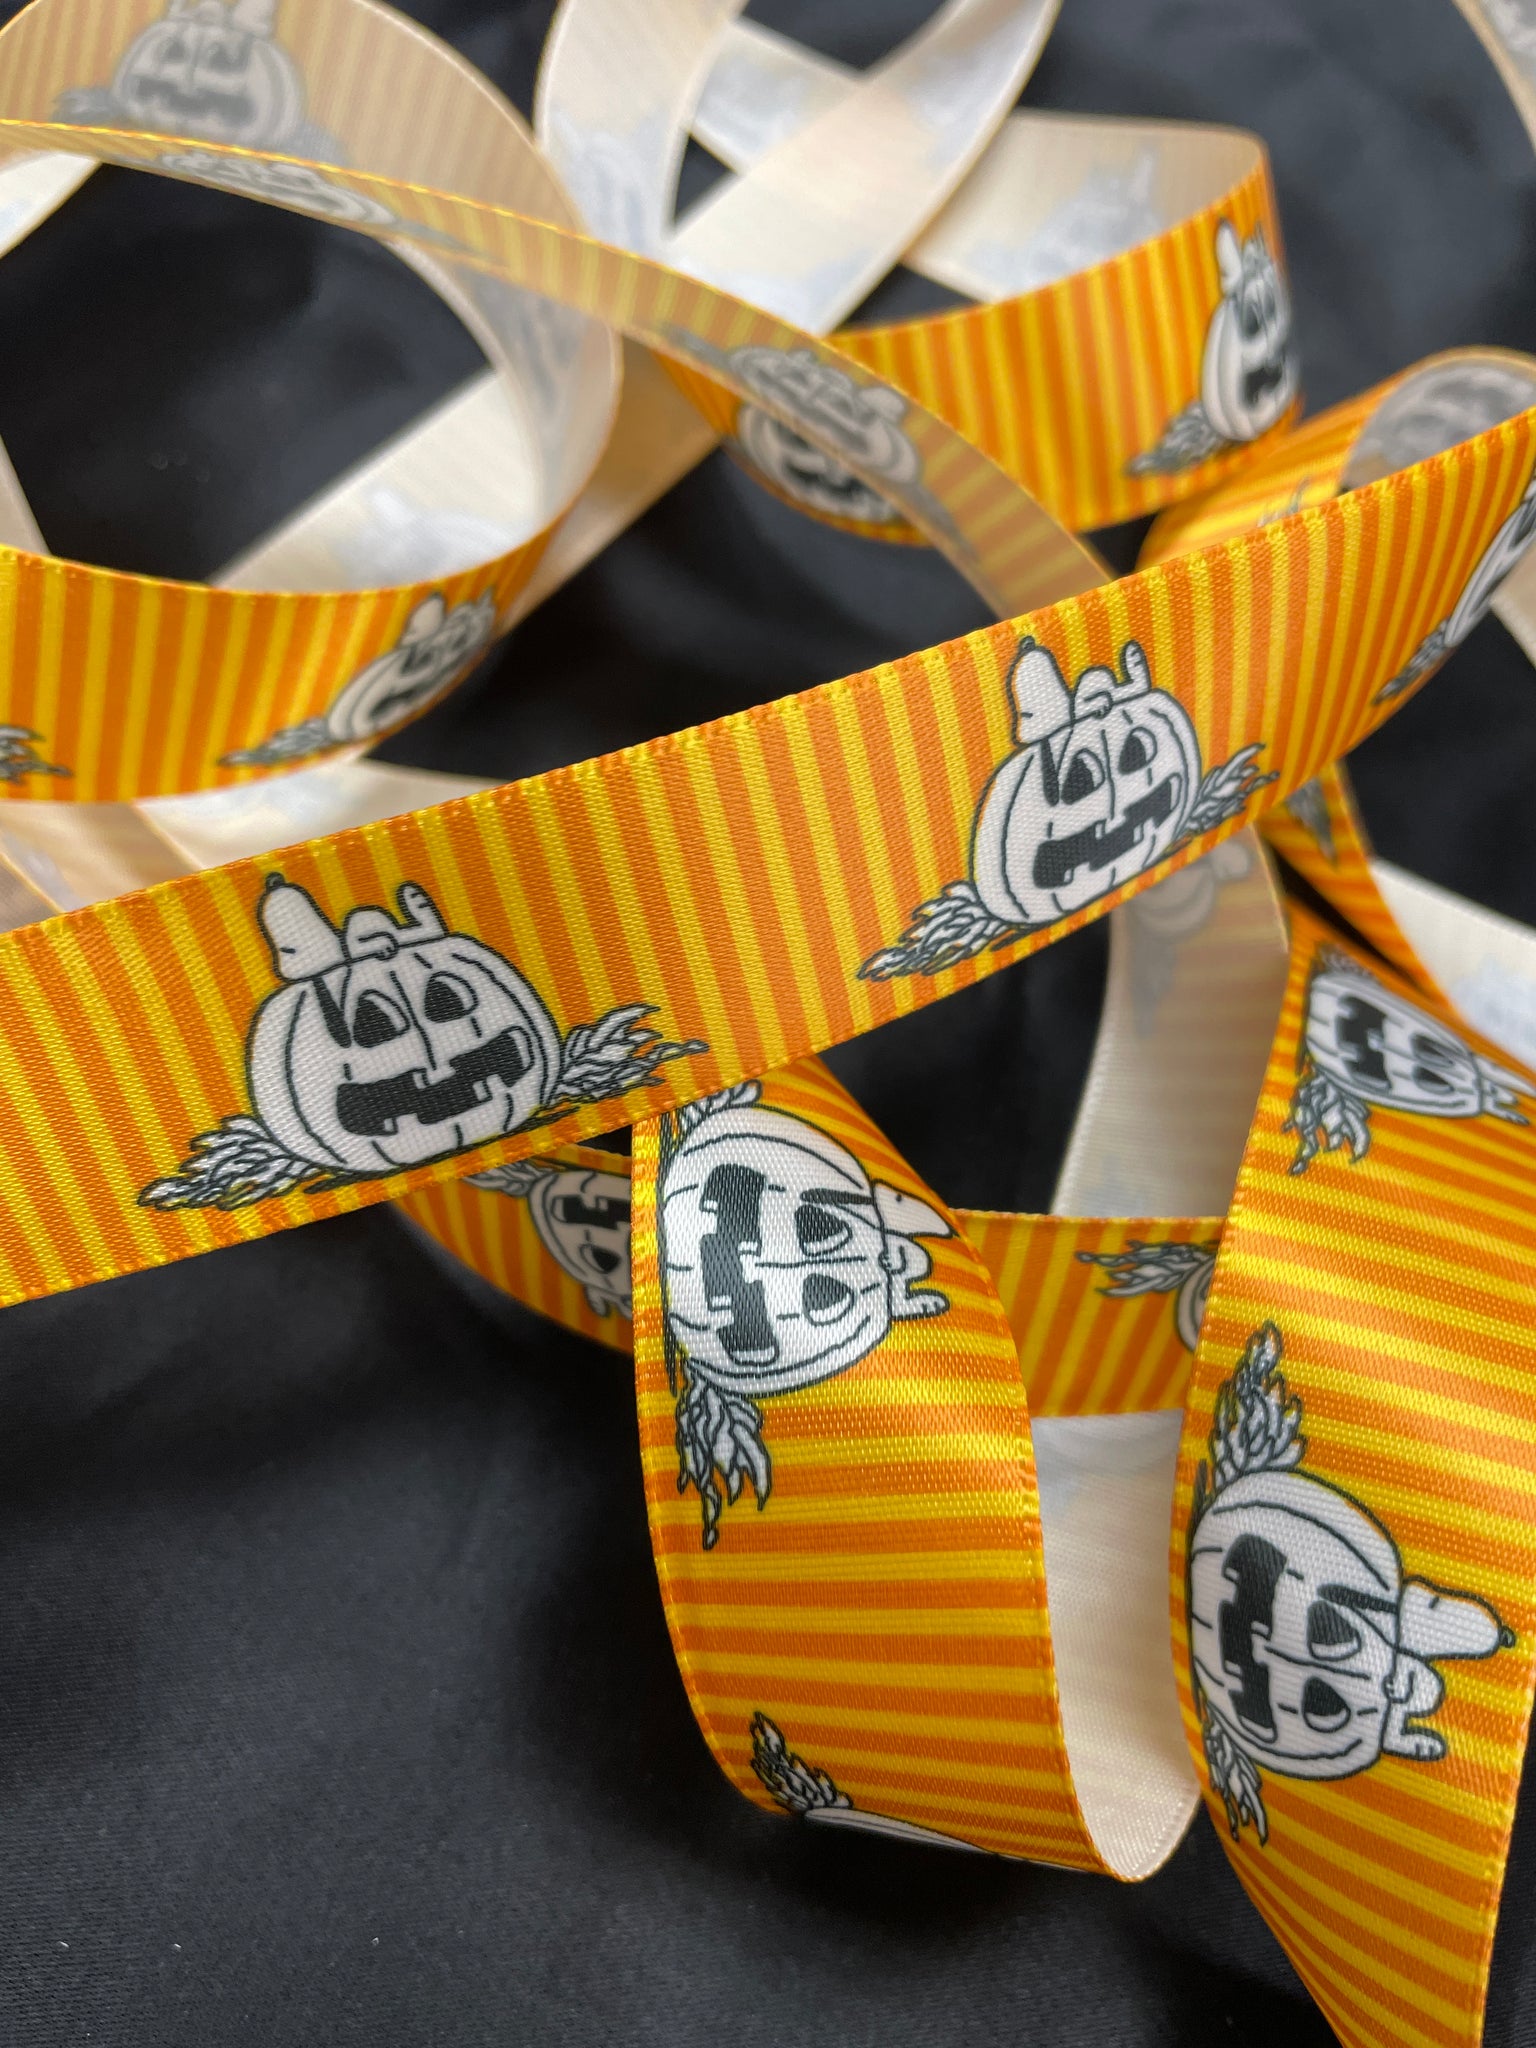 2012 3 1/8 YD Polyester Printed Satin Ribbon - Yellow and Orange Stripes with Snoopy on a Jack-o-Lantern